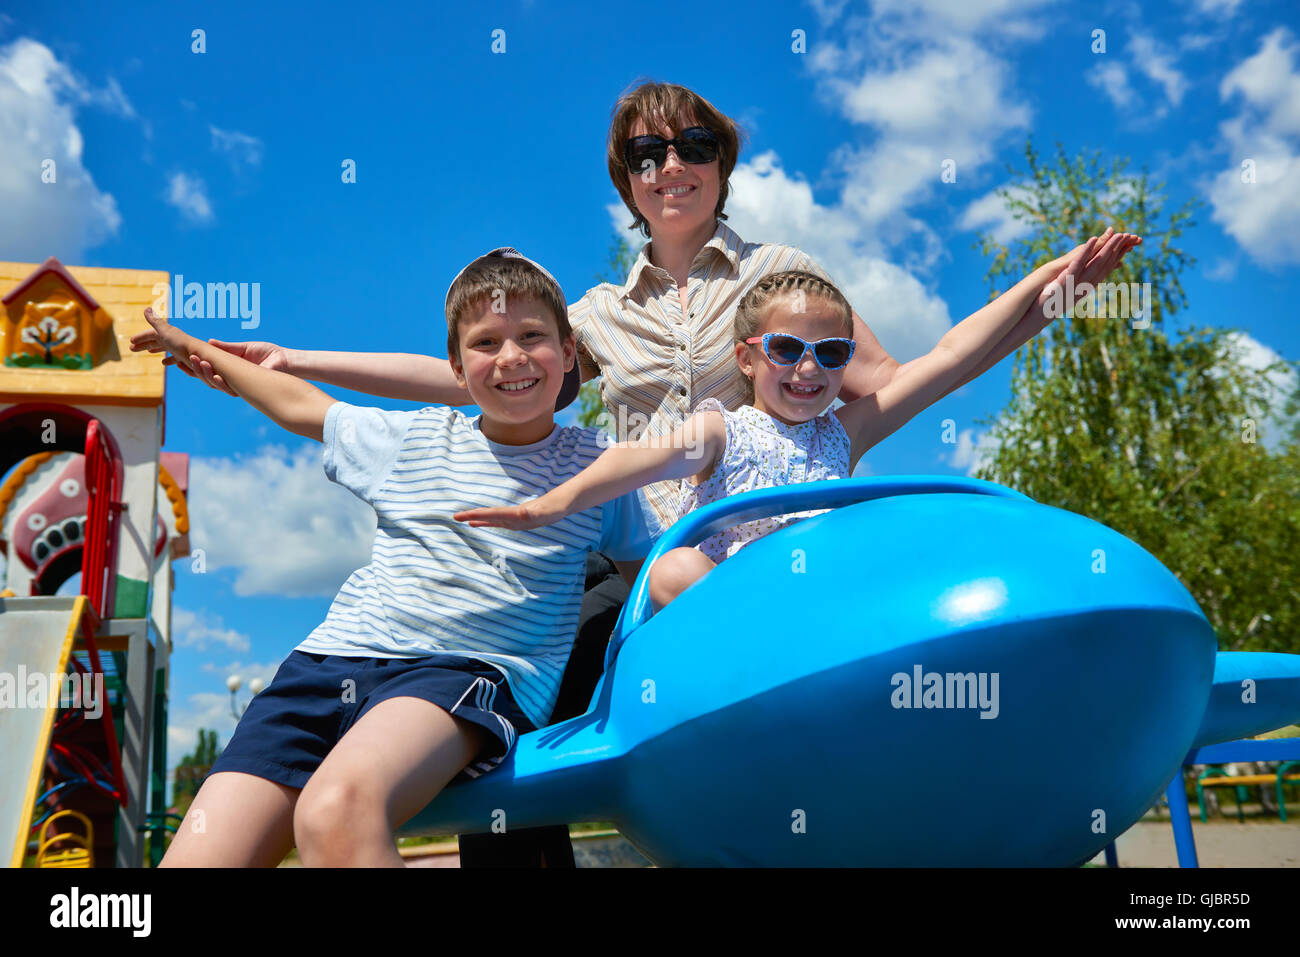 child and woman fly on blue airplane attraction in city park, happy family, summer vacation concept Stock Photo